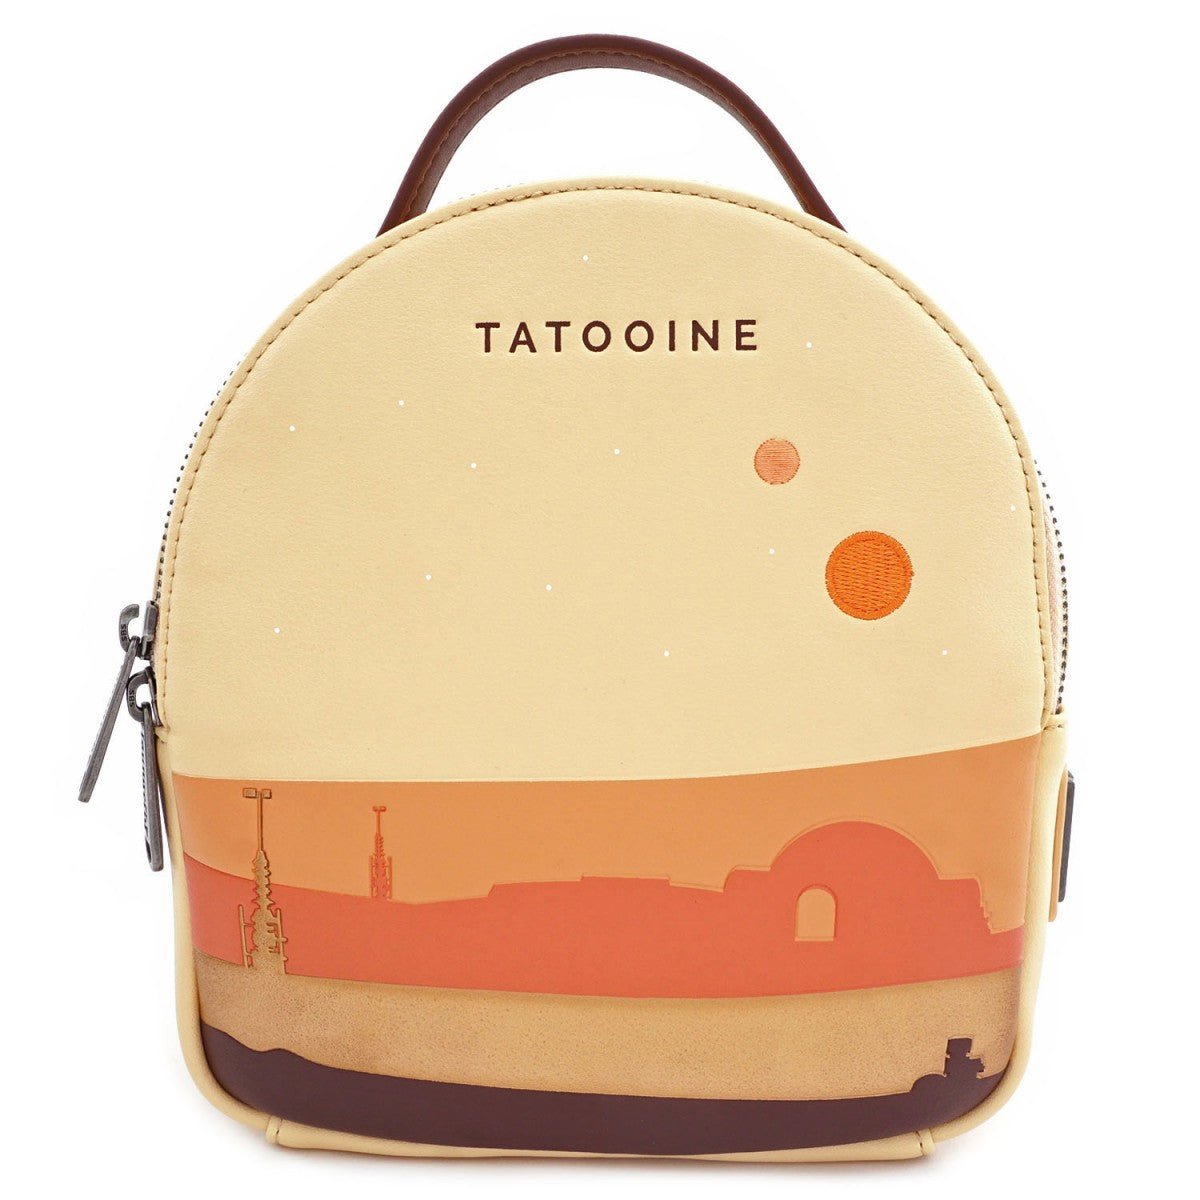 Loungefly x Star Wars Tatooine Convertible Backpack Set - GeekCore